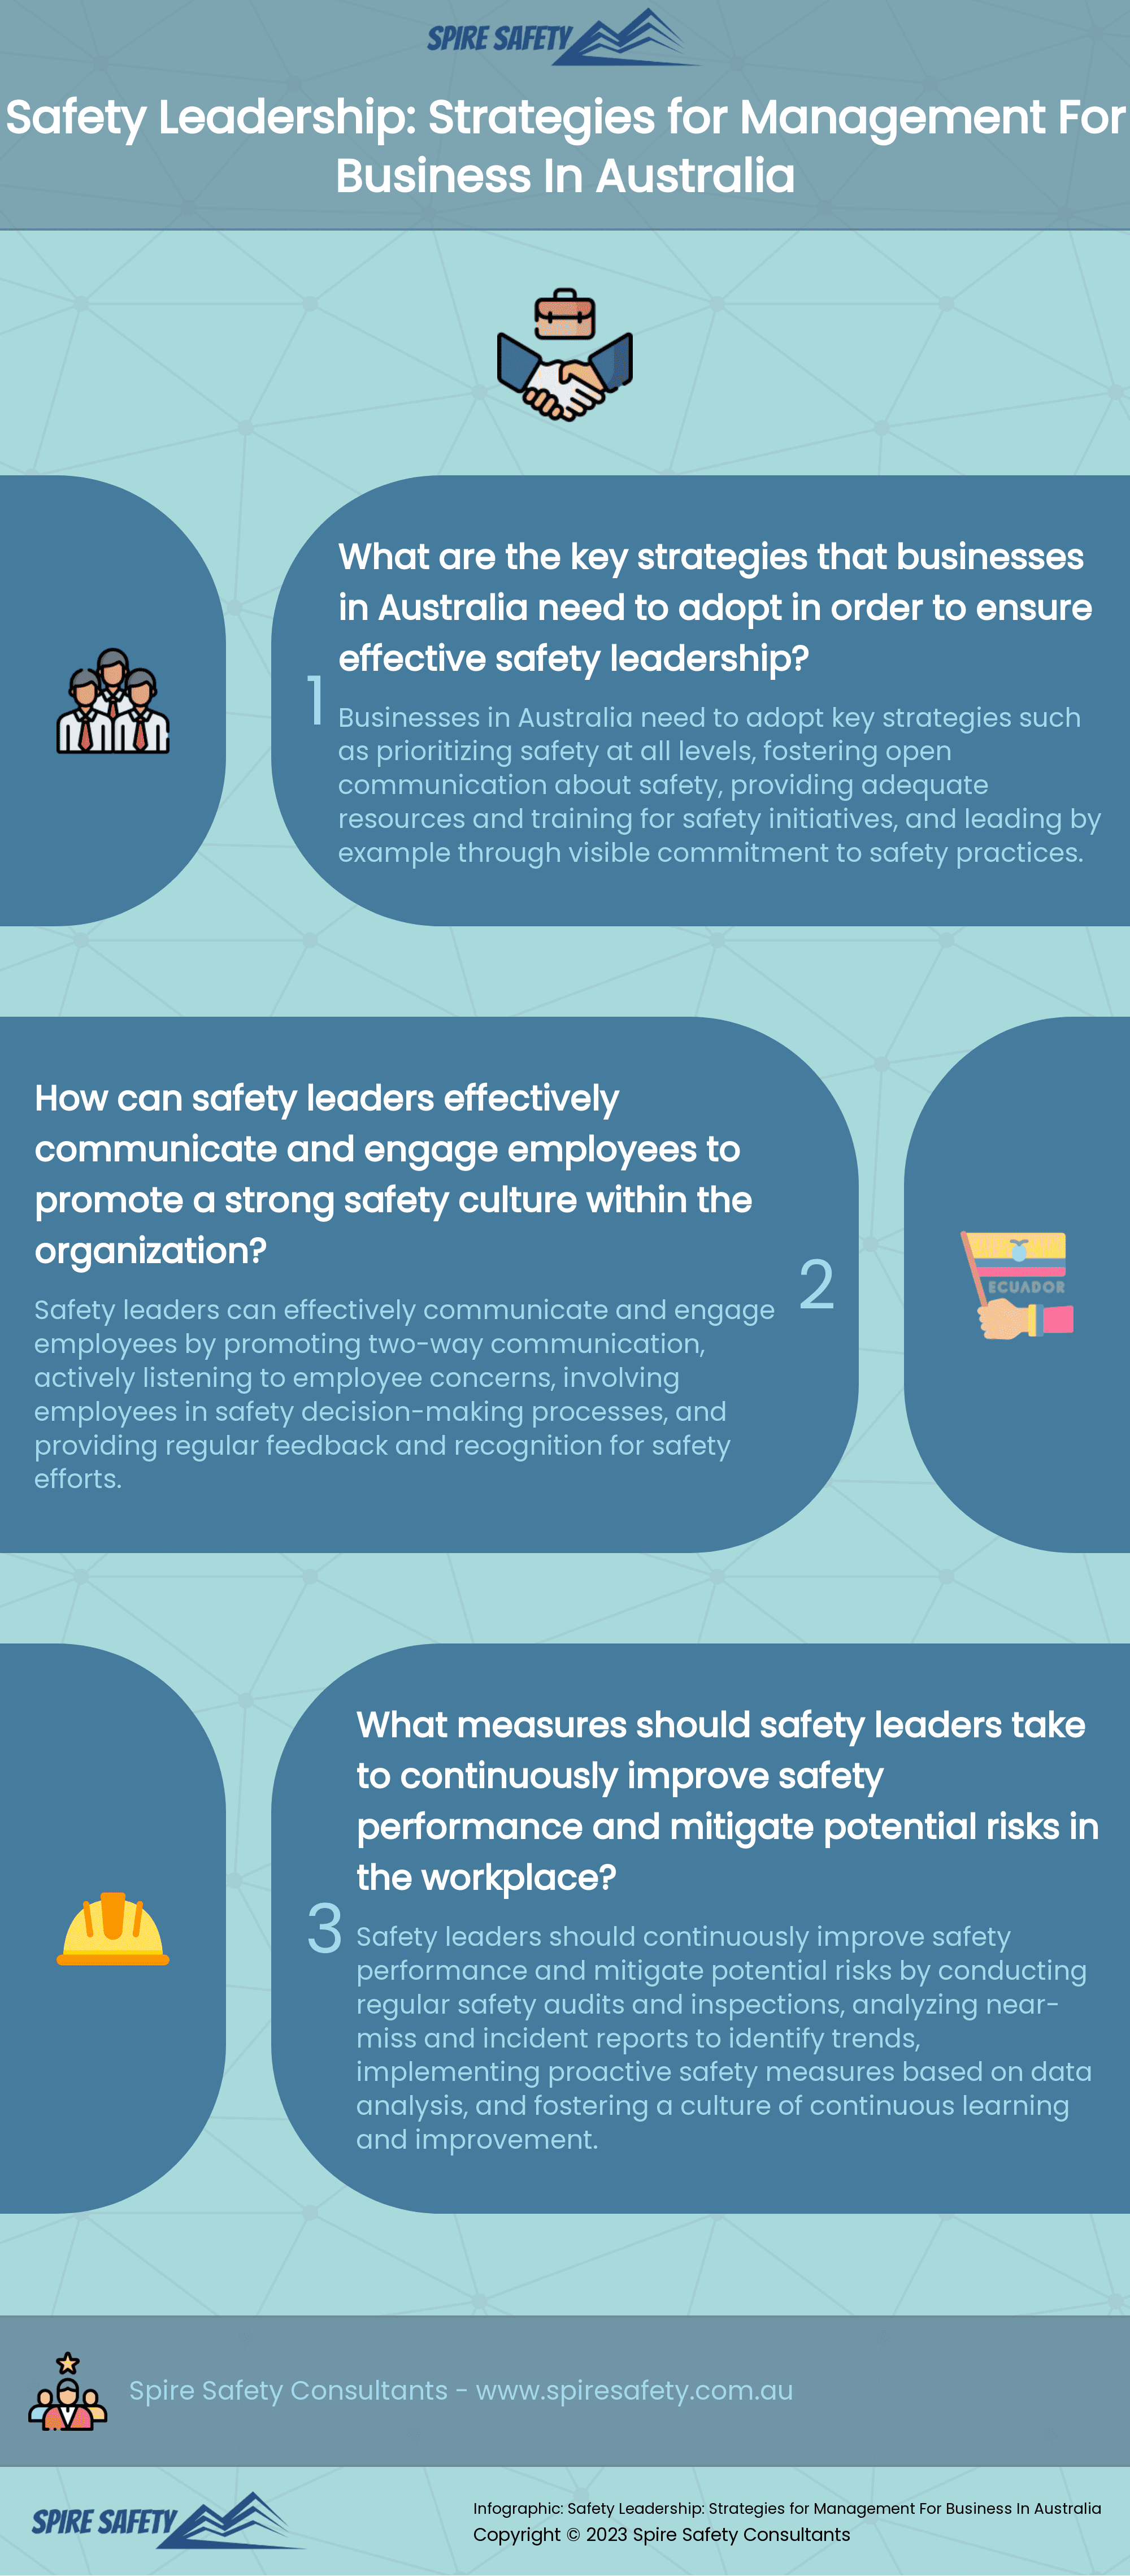 Safety Leadership: Strategies for Management For Business In Australia